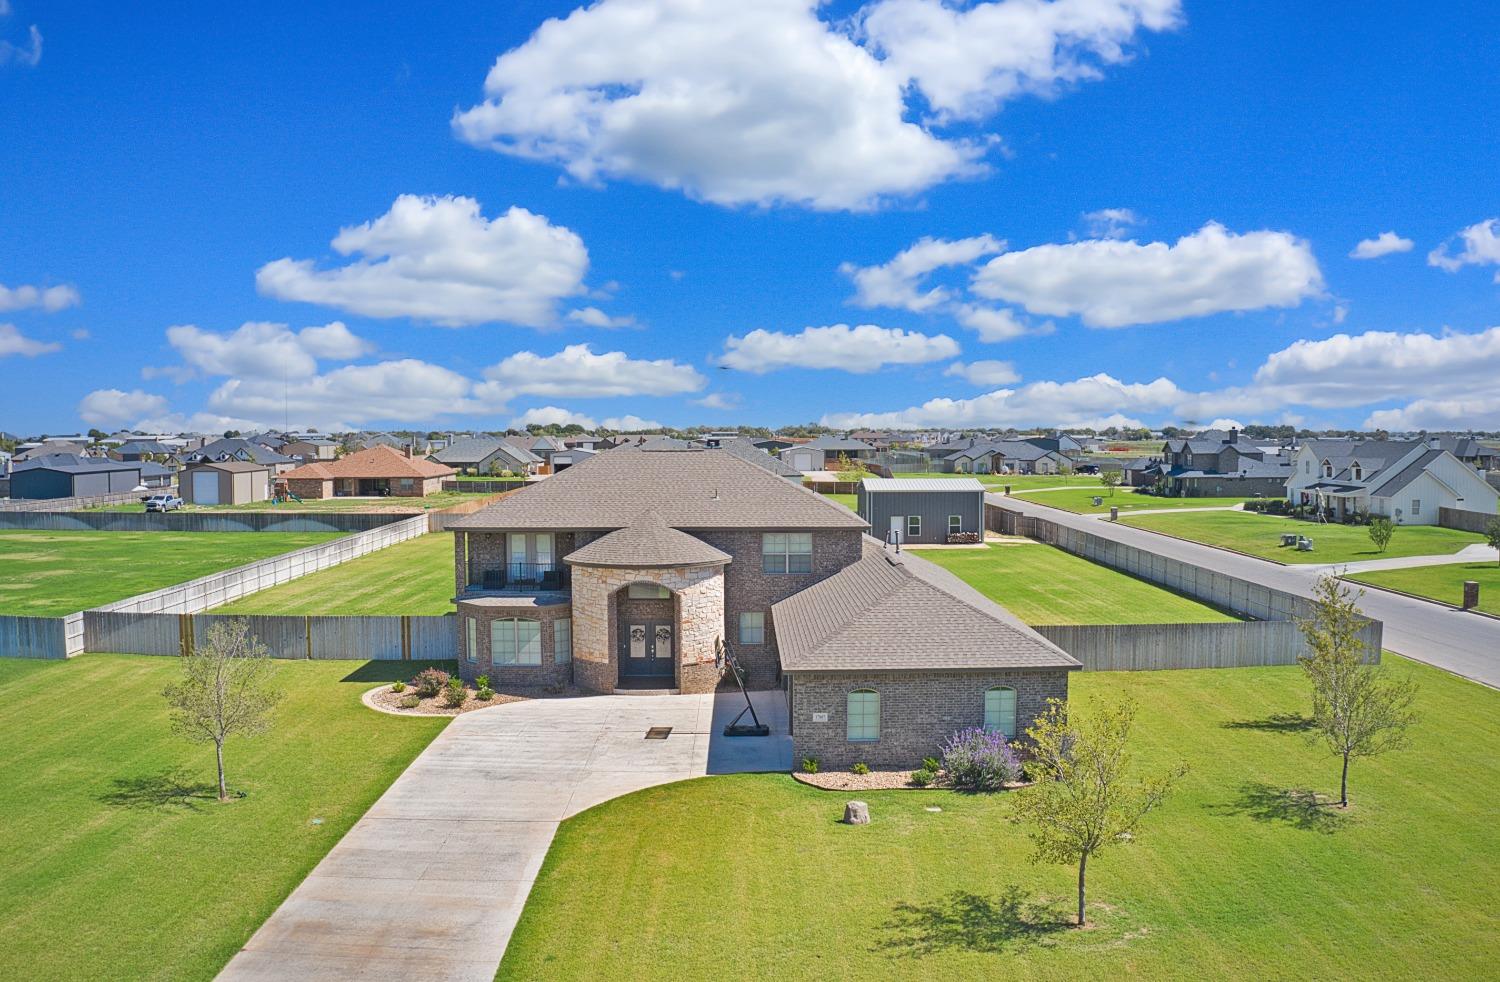 Incredible 6-bedroom, 4.5-bathroom haven nestled in prestigious Magnolia Estates on a sprawling 1-acre lot! Zoned to highly sought-after Cooper ISD, this home boasts a 3-car garage & a 25'x30' insulated shop, complete with electric, plumbing, & direct street access. You'll be welcomed by the grand entrance, showcasing a beautiful staircase, catwalk, & soaring cathedral ceilings that carry through to the spacious living room. Great open concept layout & ample space for entertaining! The expansive kitchen includes a large island, double ovens, a gas cooktop, & walk-in pantry. Custom countertops grace every surface in this home, featuring exquisite marble in the butler's pantry & laundry room, & stunning granite throughout. You'll love the luxurious master suite with his & hers vanities, an absolute dream closet, & a balcony. Great outdoor entertaining space on the large covered patio! Sprinkler system in front and back. Great opportunity to own your own piece of heaven in South Lubbock!